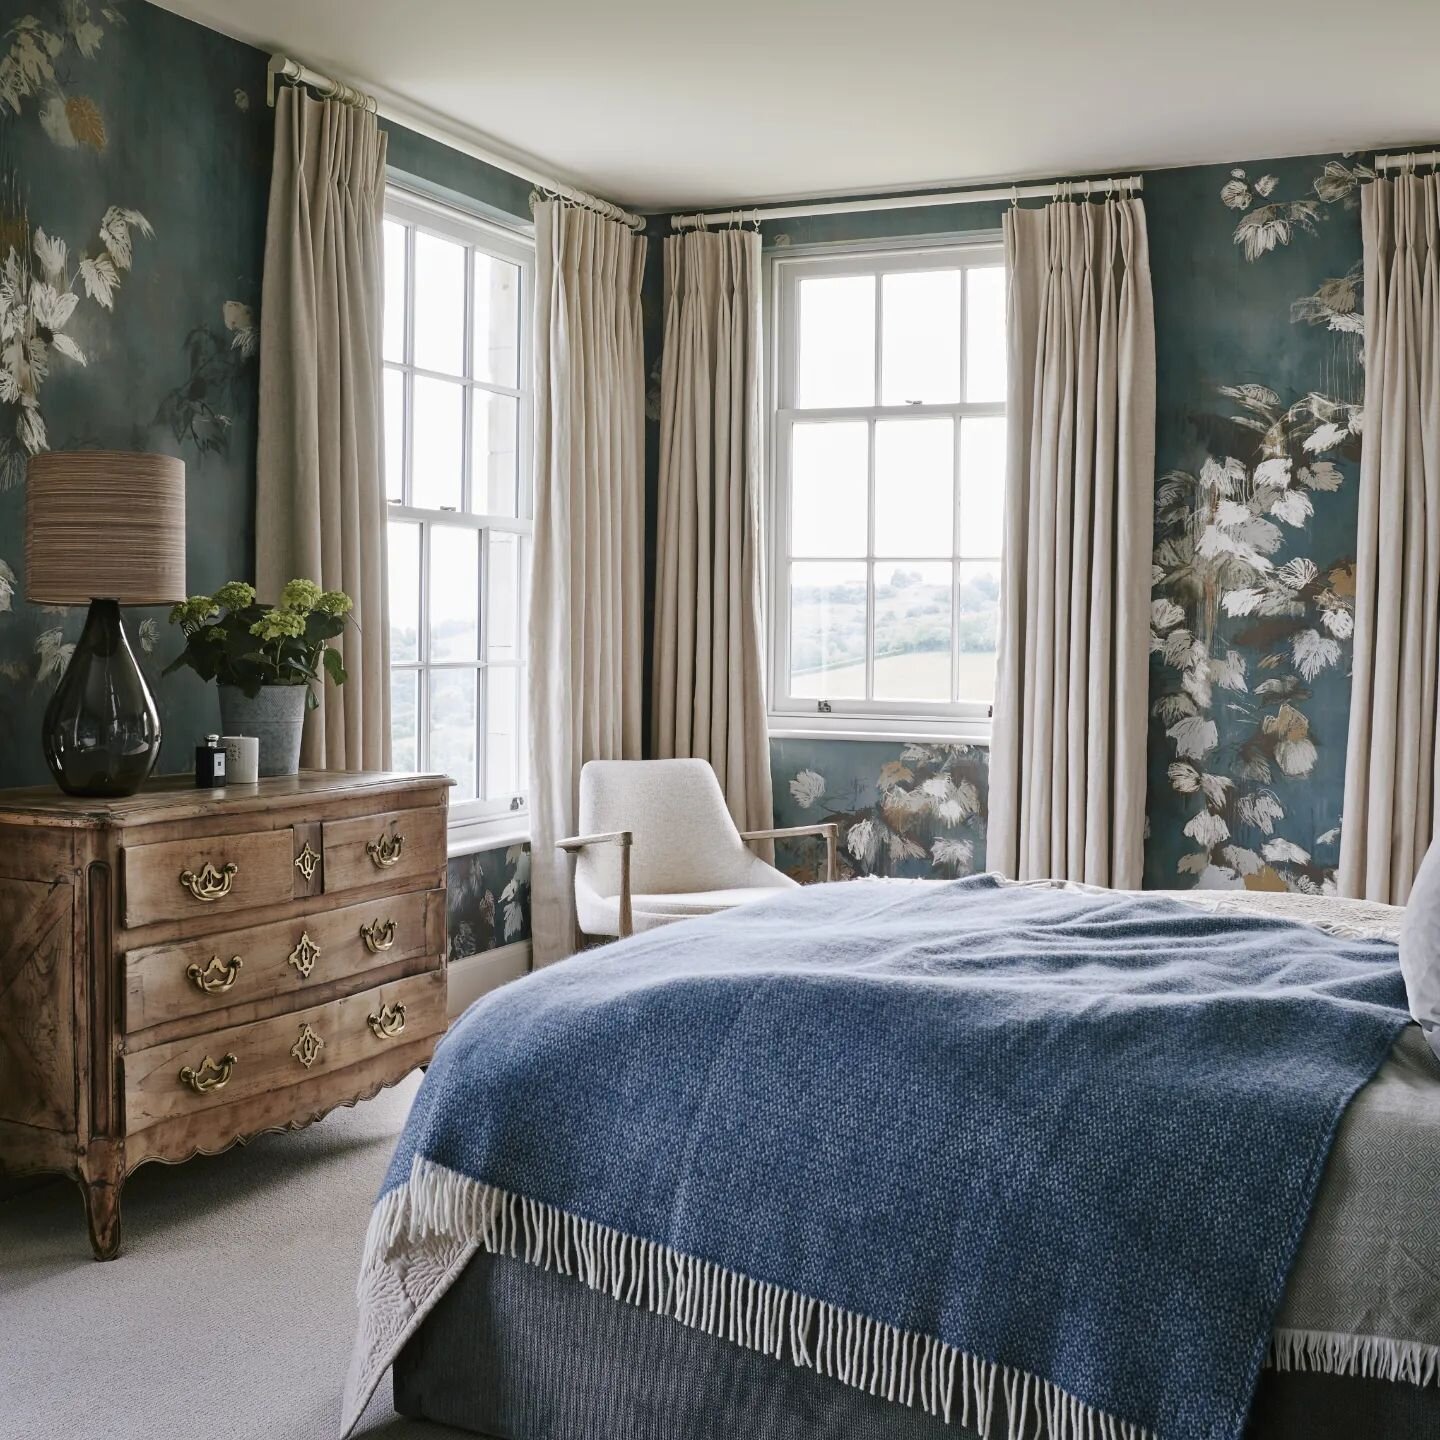 @lizzofabriceditor wallpaper is the star of the show in here....views down Saint Catherine's valley toward Bath draw the eye. Blue and green in perfect harmony.
.
🏠@casa.architects 
📸@horwoodphoto 
.
#nature #bedroom #wallpaper #Blue #interiordesig